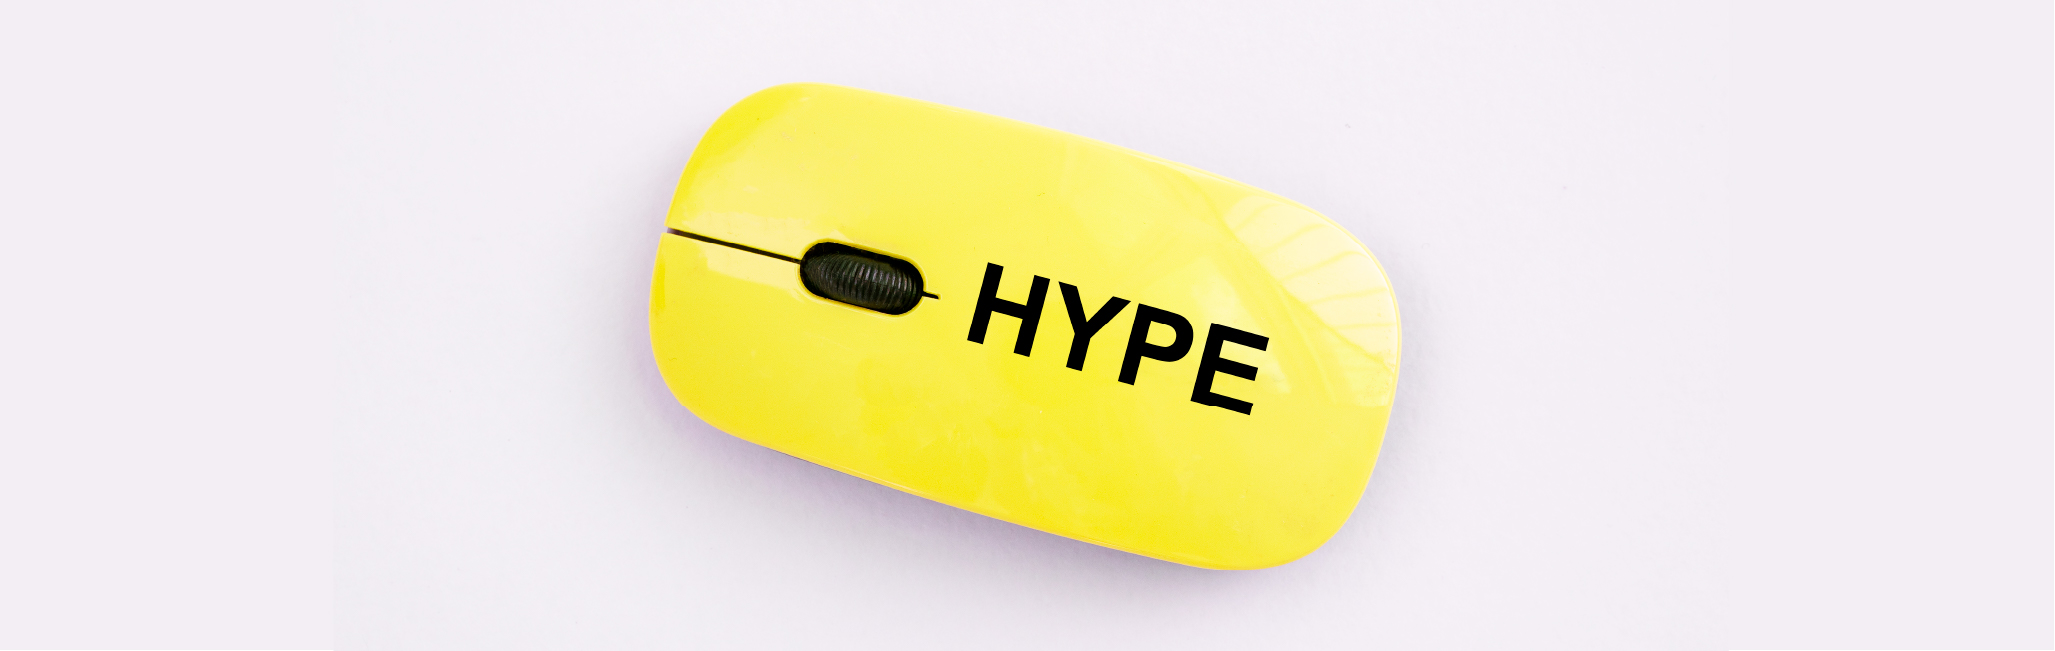 2021 eCommerce Trends - Yellow computer mouse with the word "Hype" on it